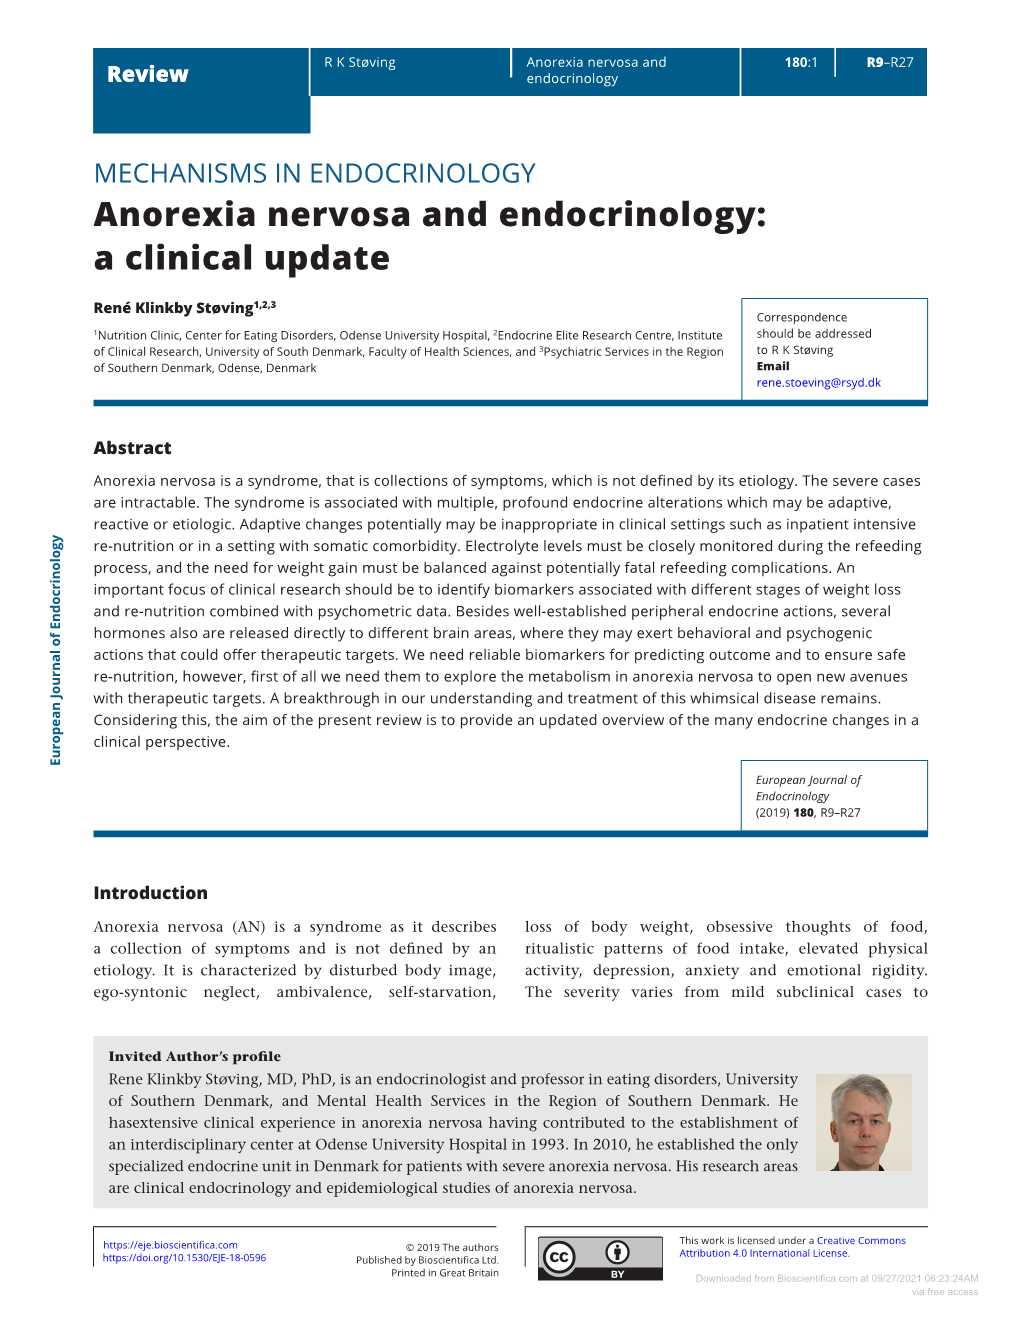 Anorexia Nervosa and Endocrinology